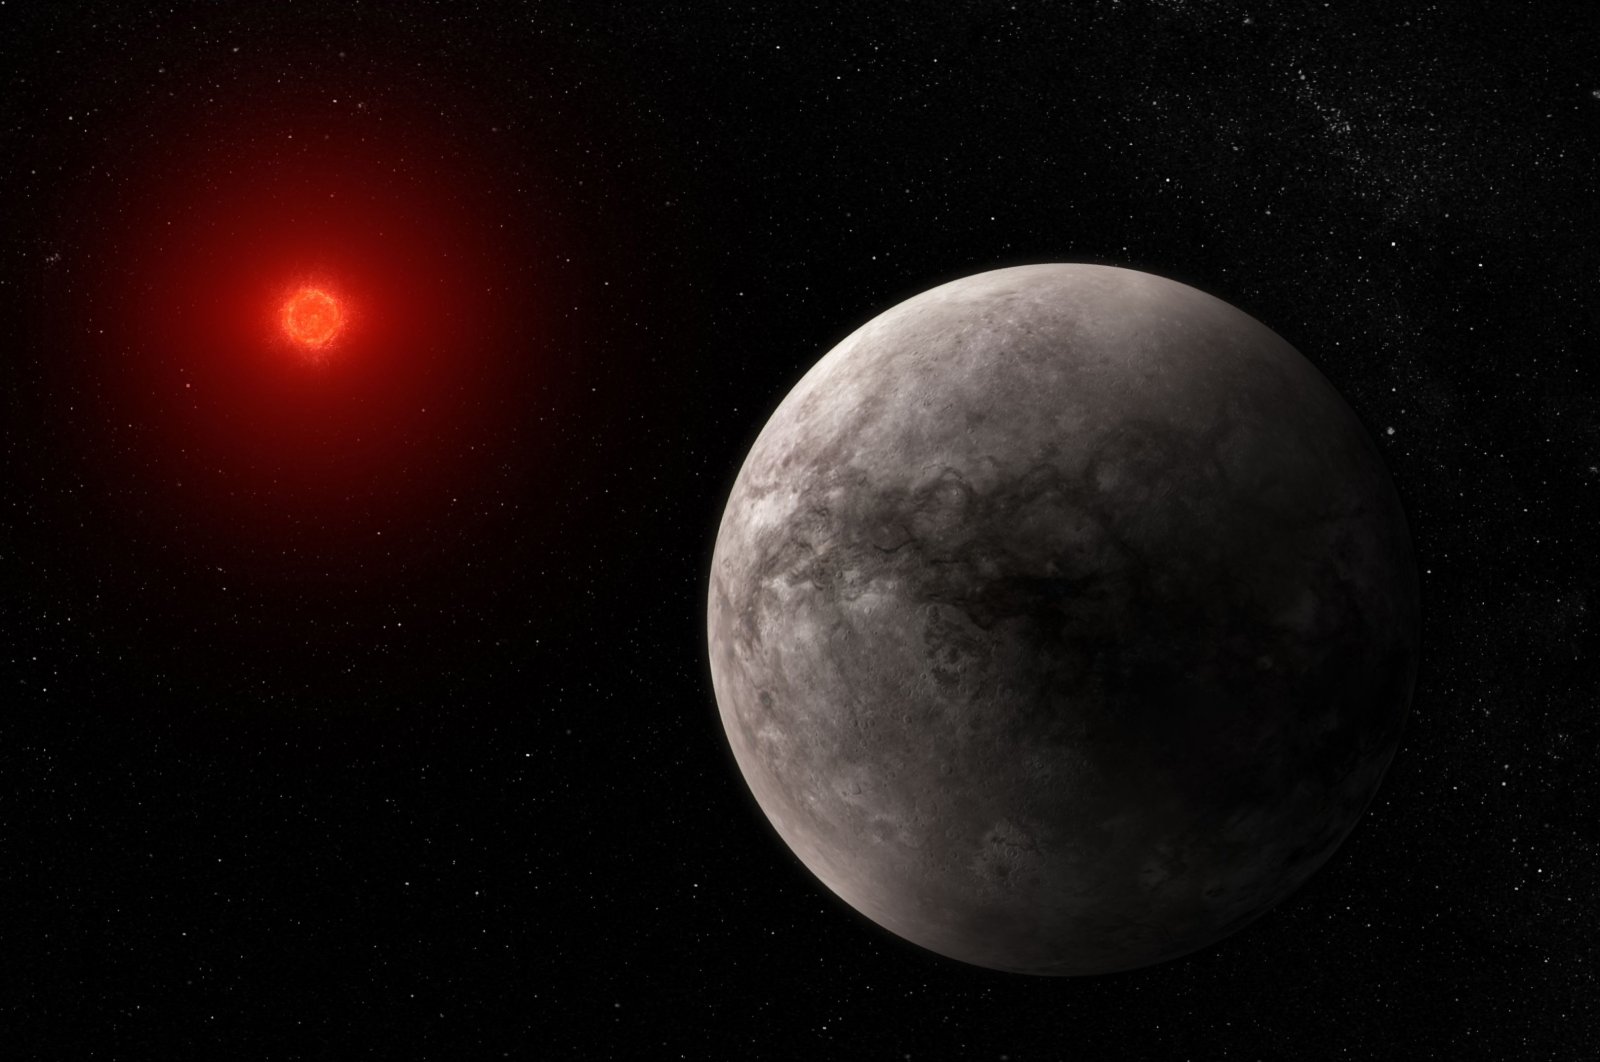 An illustration depicts what the exoplanet TRAPPIST-1 b could look like. (AP Photo)